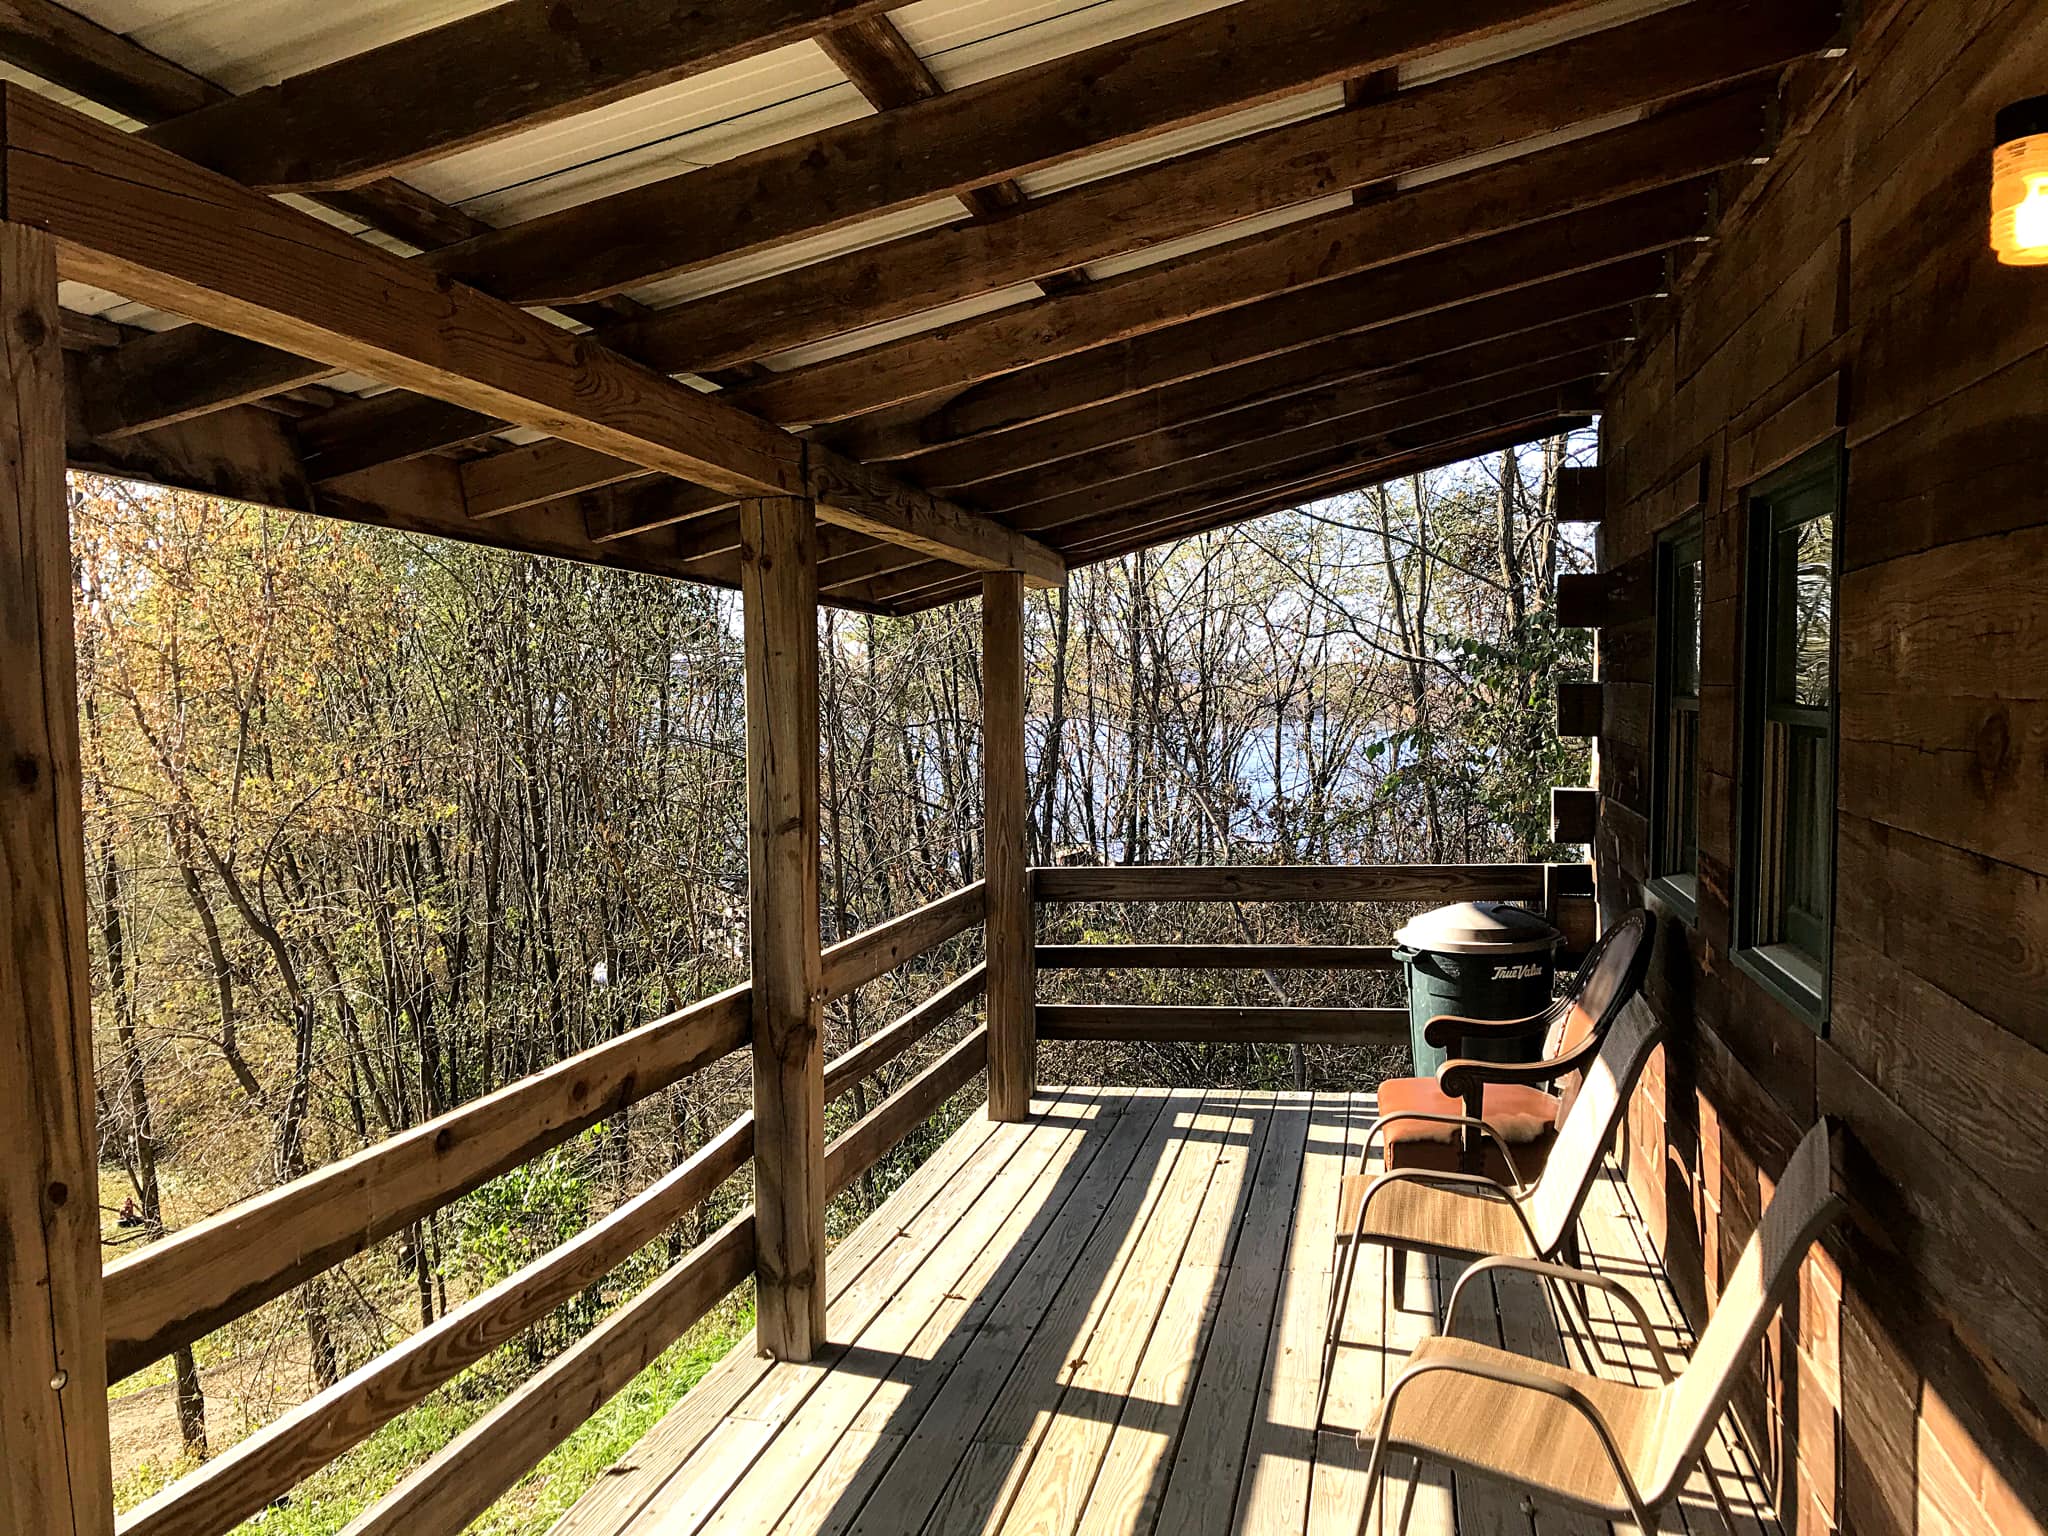 Rustic River 4 - Cabins for Rent in Savanna, Illinois, United States